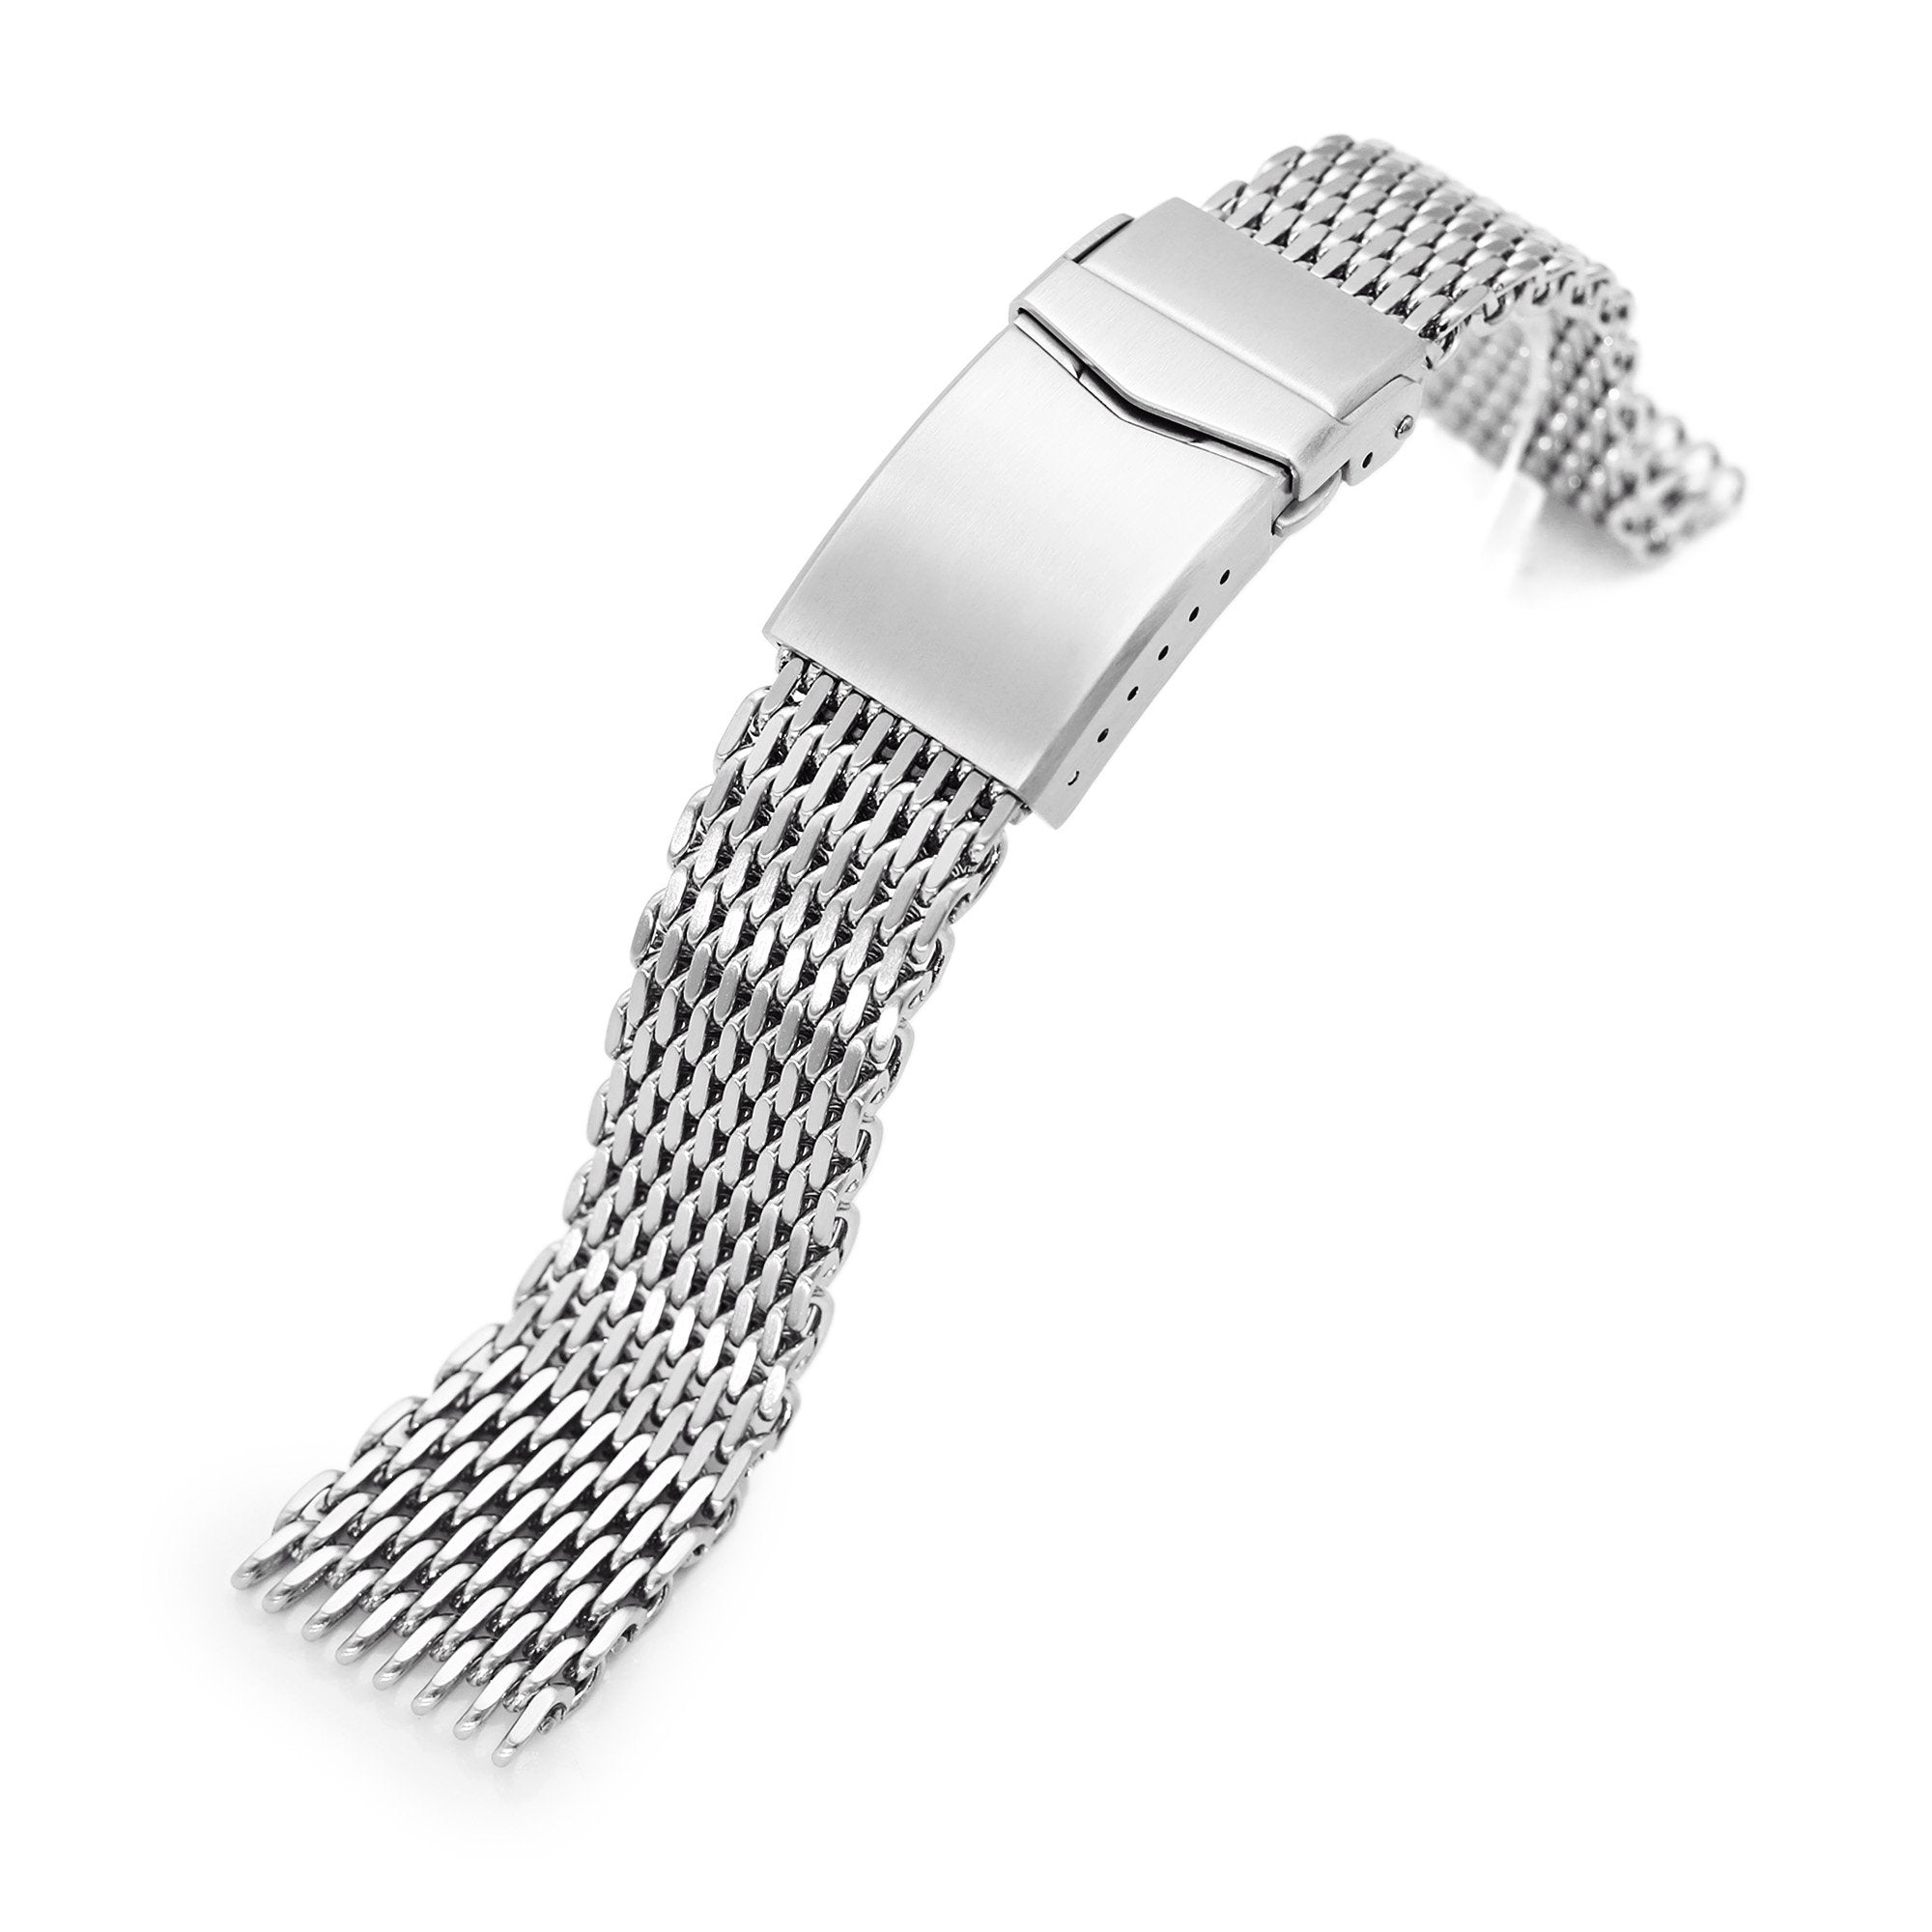  Hstrap Stainless Steel Watch Band 18mm 20mm 22mm 24mm Solid  Mesh Watch Bands Silver Black Metal Watch Bracelet Deployment Buckle  Brushed